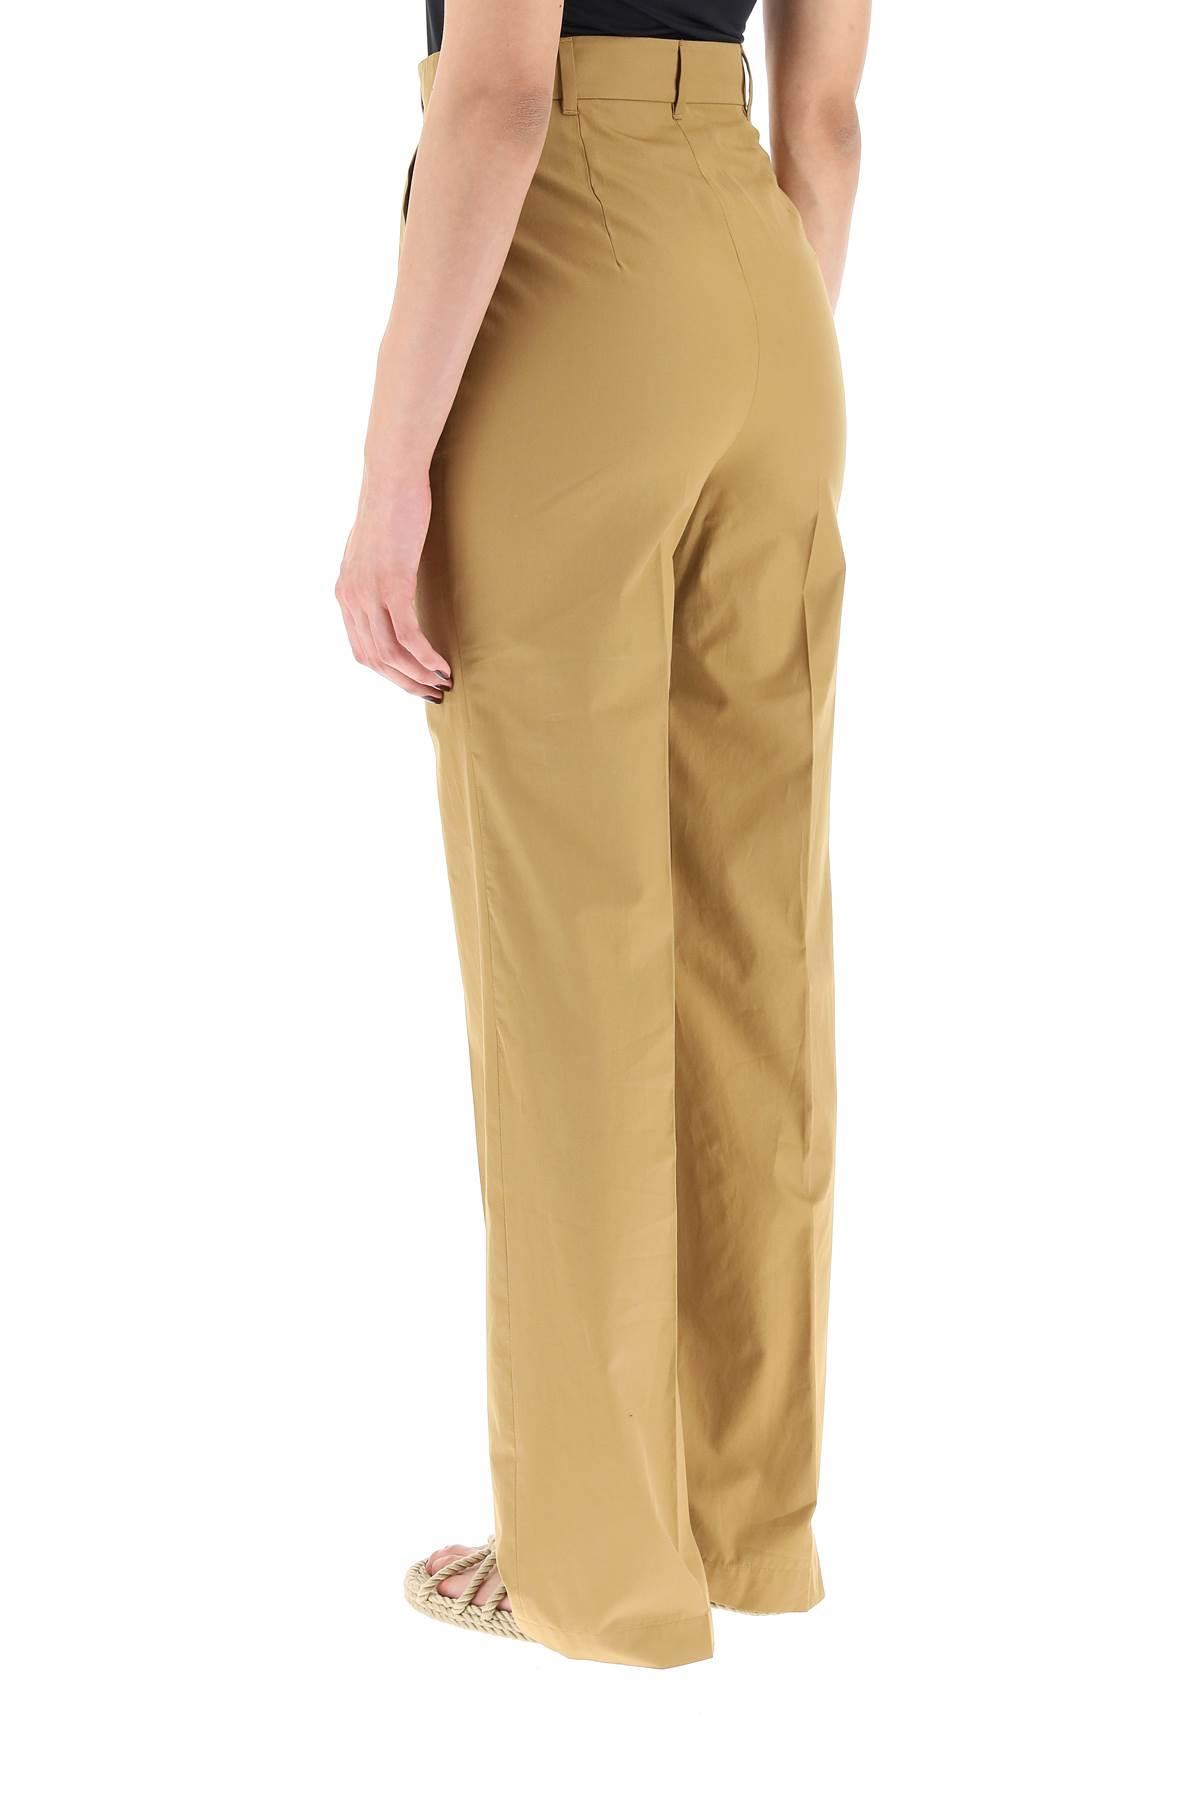 Slacks and Chinos Straight-leg trousers Womens Clothing Trousers Max Mara Studio Cotton High Waist Straight Leg Trousers in Pink 